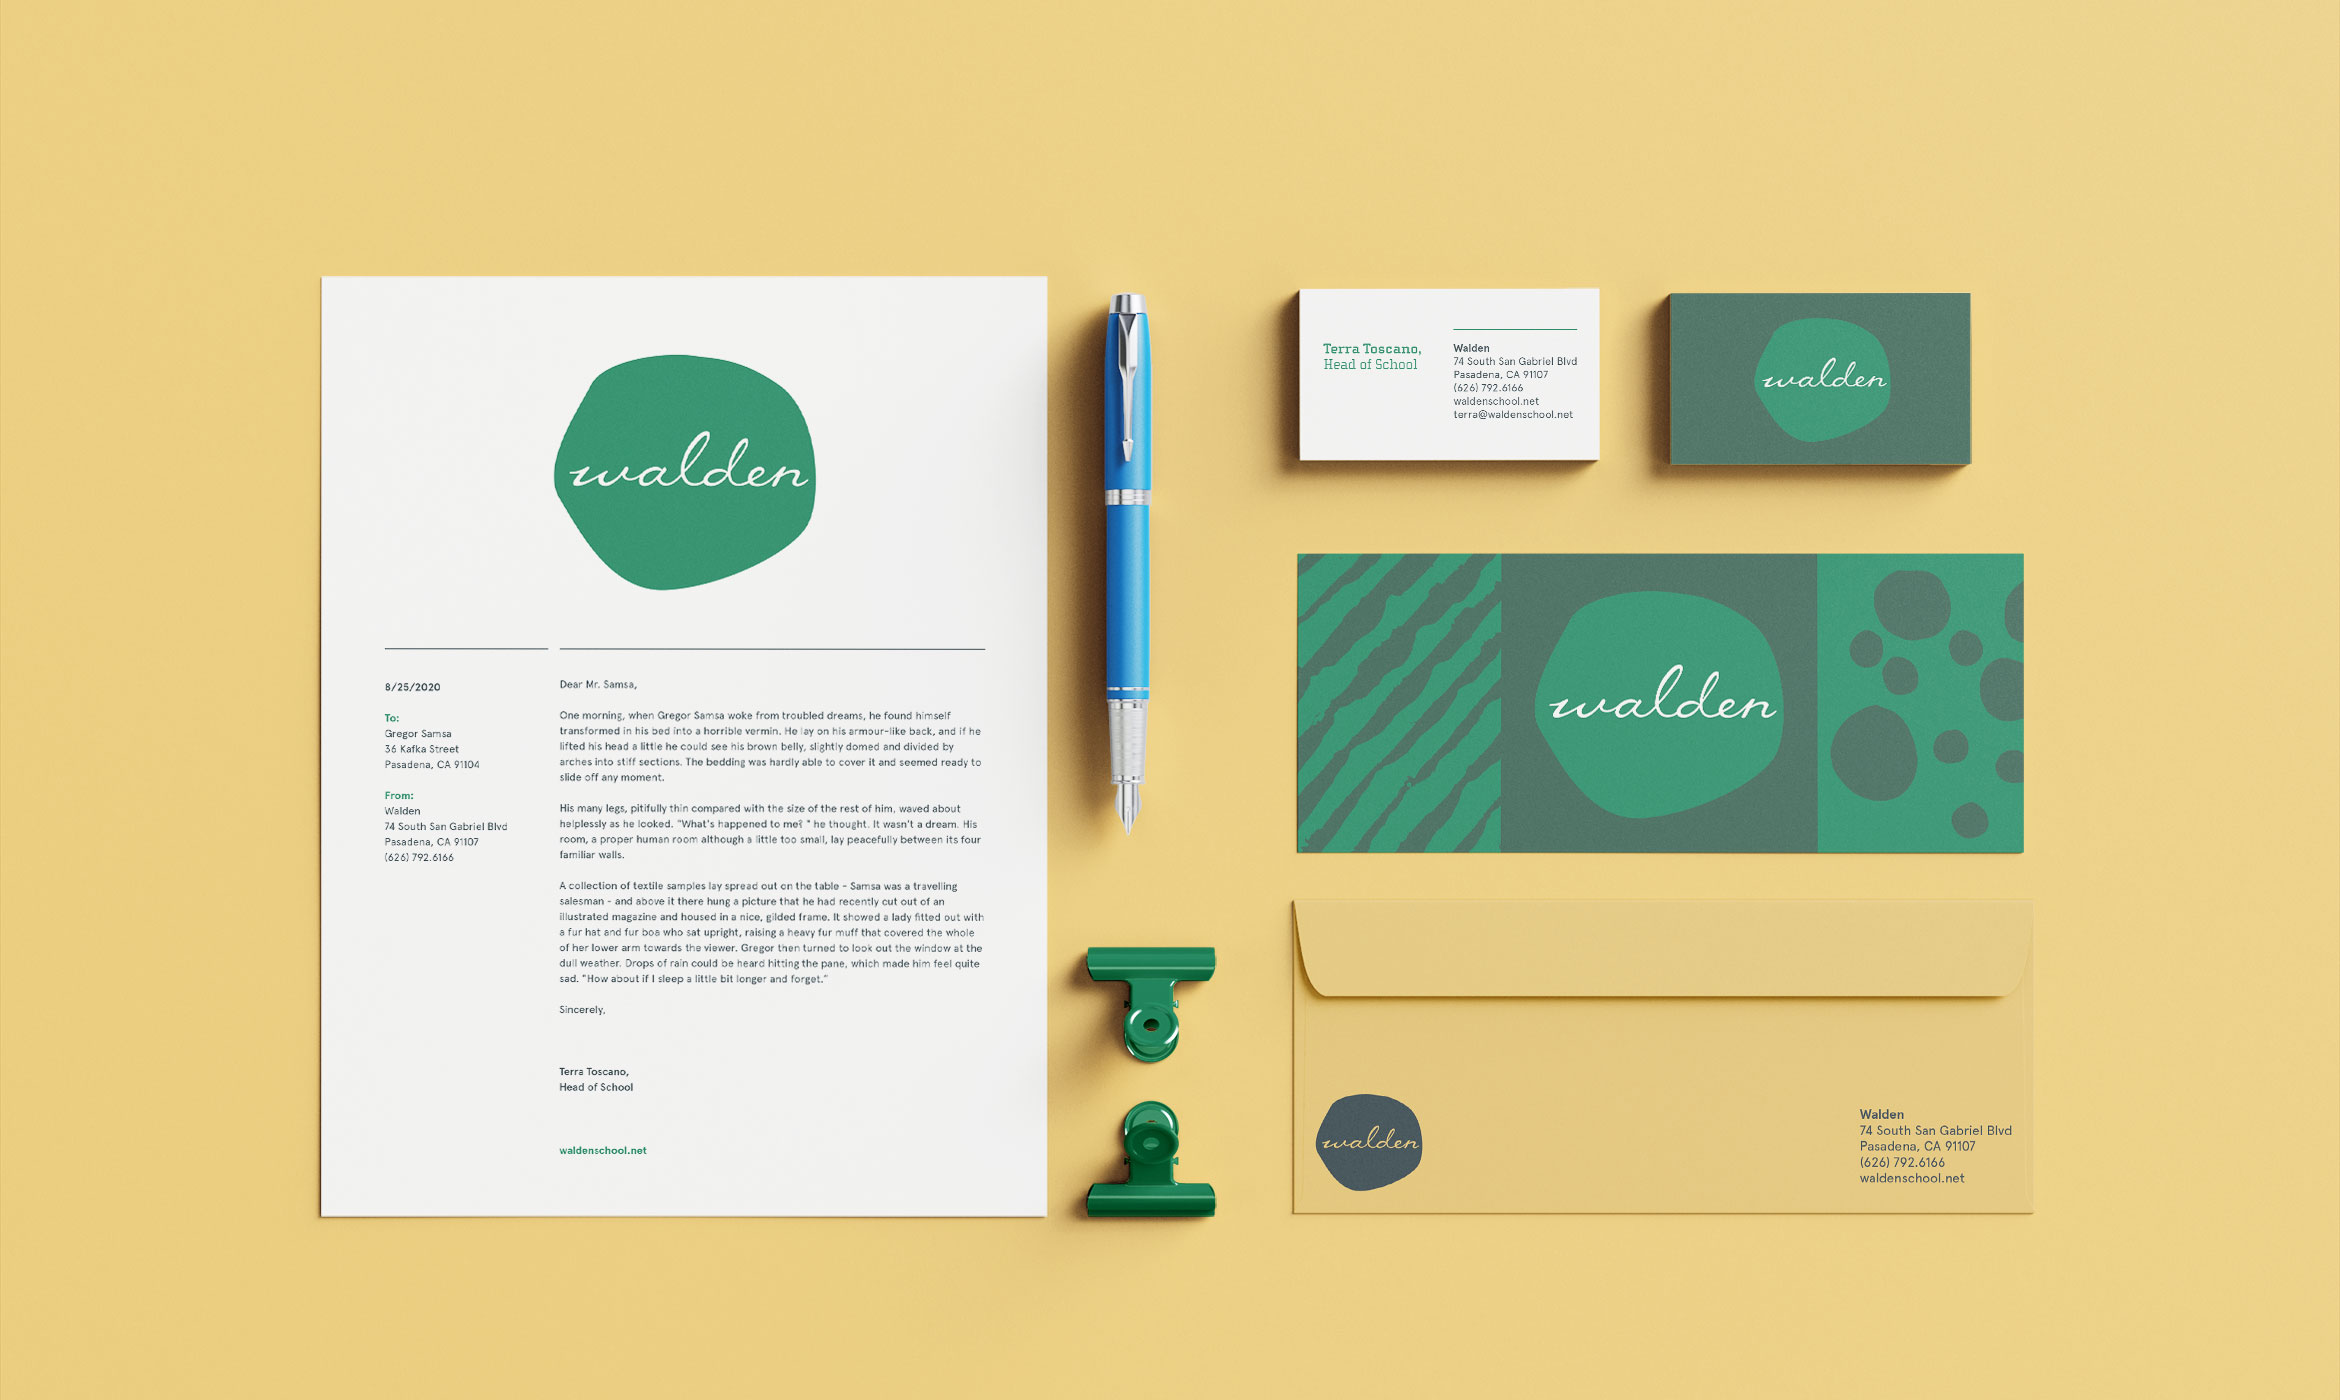 Stationery from the Walden School rebrand designed by Kilter